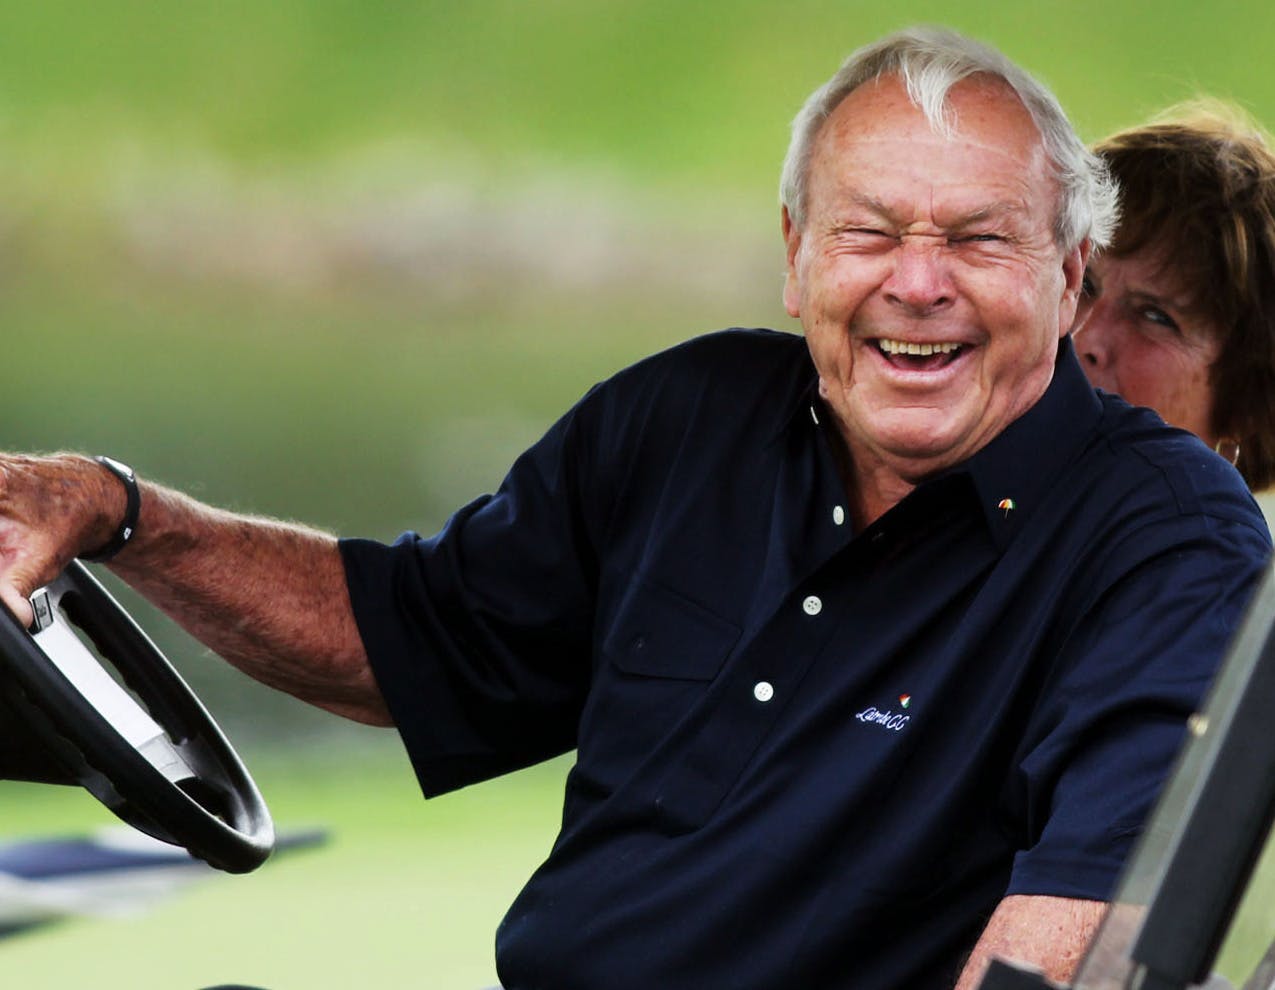 Arnold Palmer became just 'Arnie' to his many fans